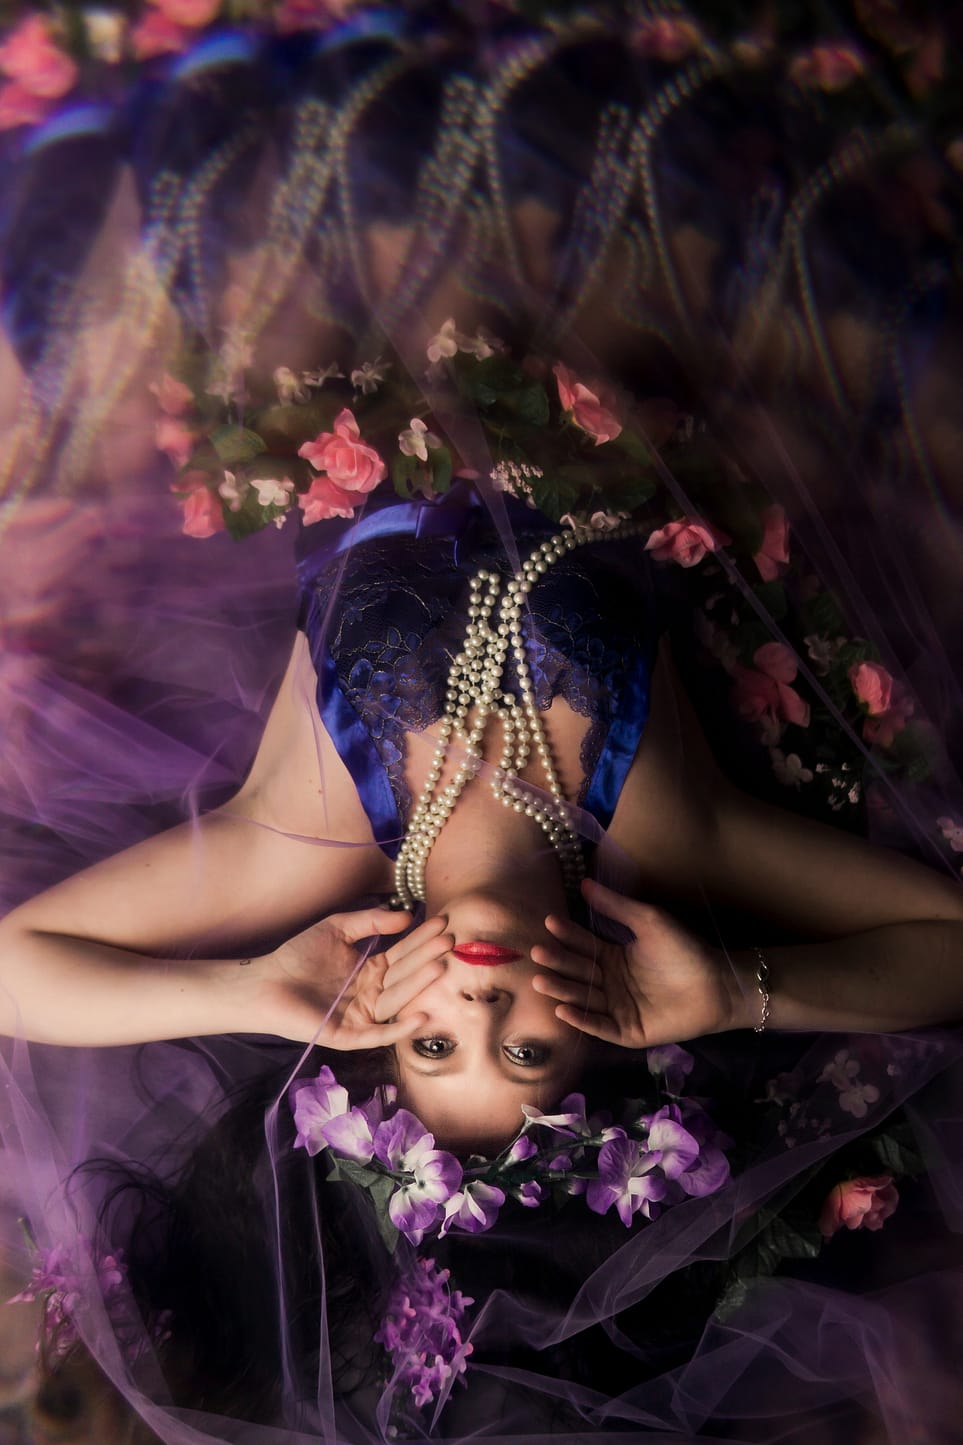 A beautiful woman lying between roses and purple flowers